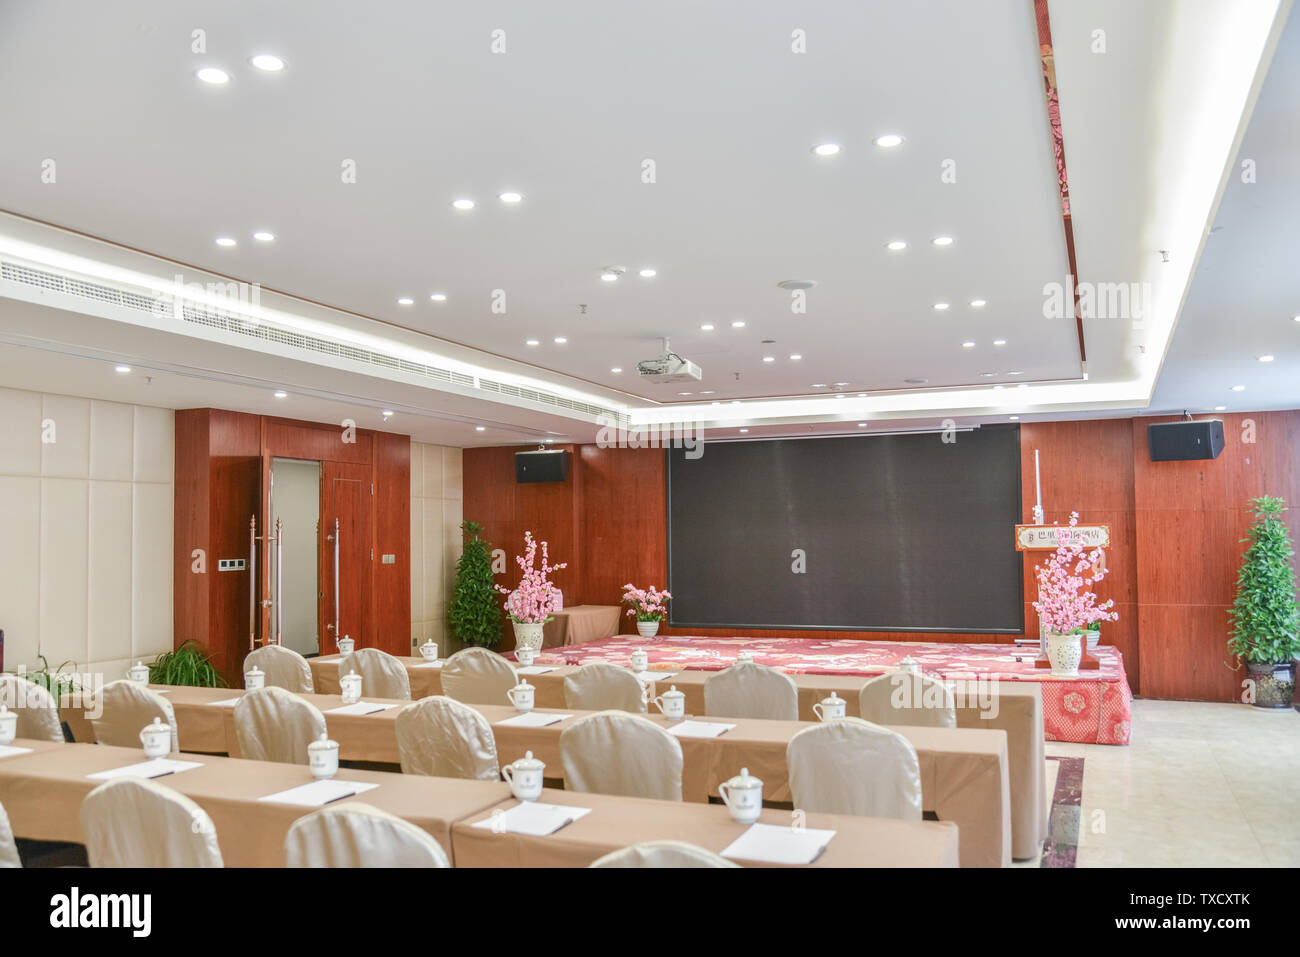 Hotel conference room decoration effect Stock Photo - Alamy